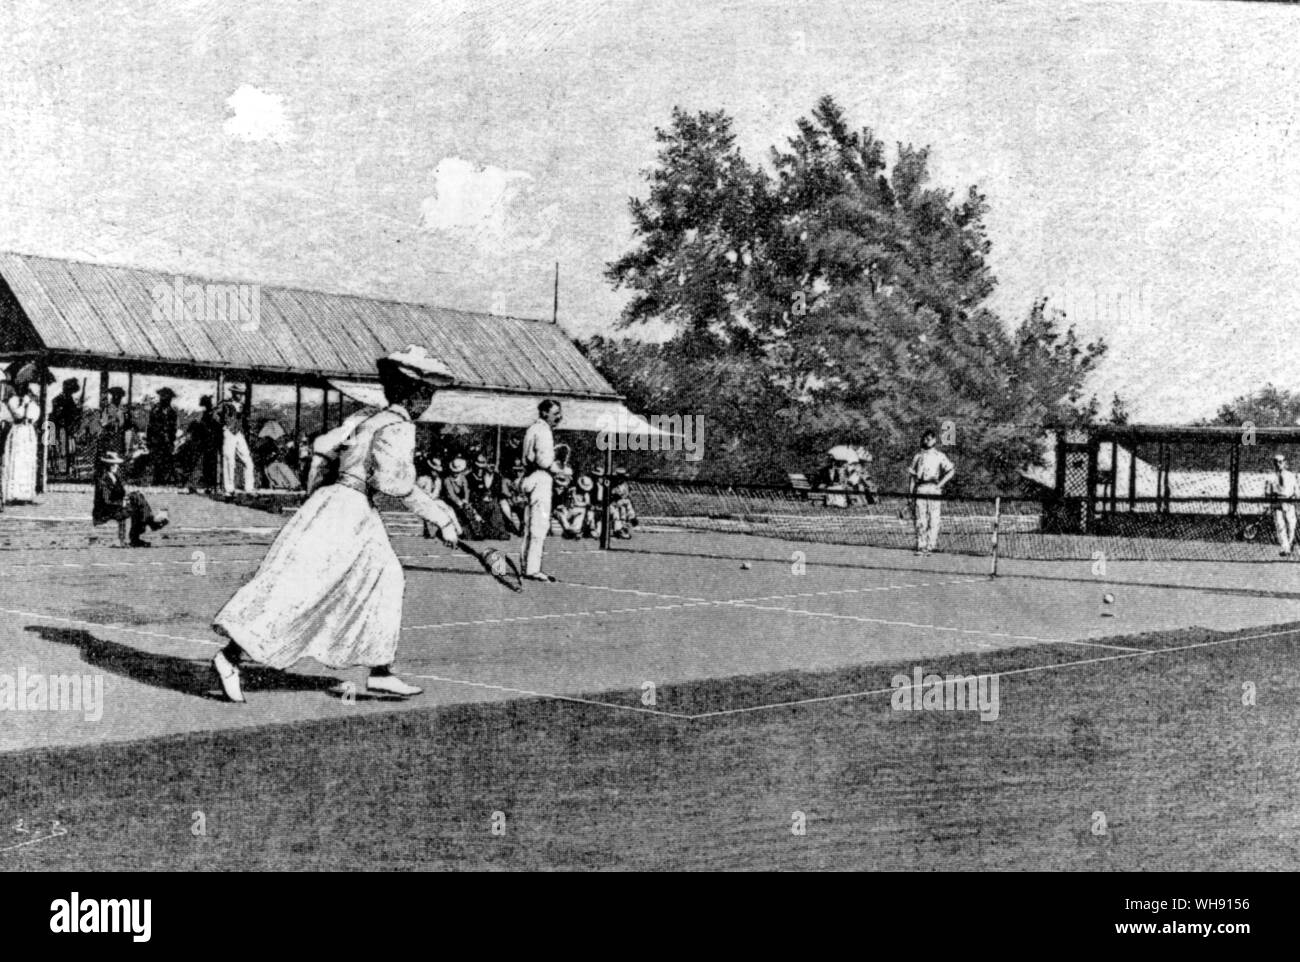 Mixed doubles at the Club de Dinard, a resort where lawn tennis was popular in its early days.. Stock Photo